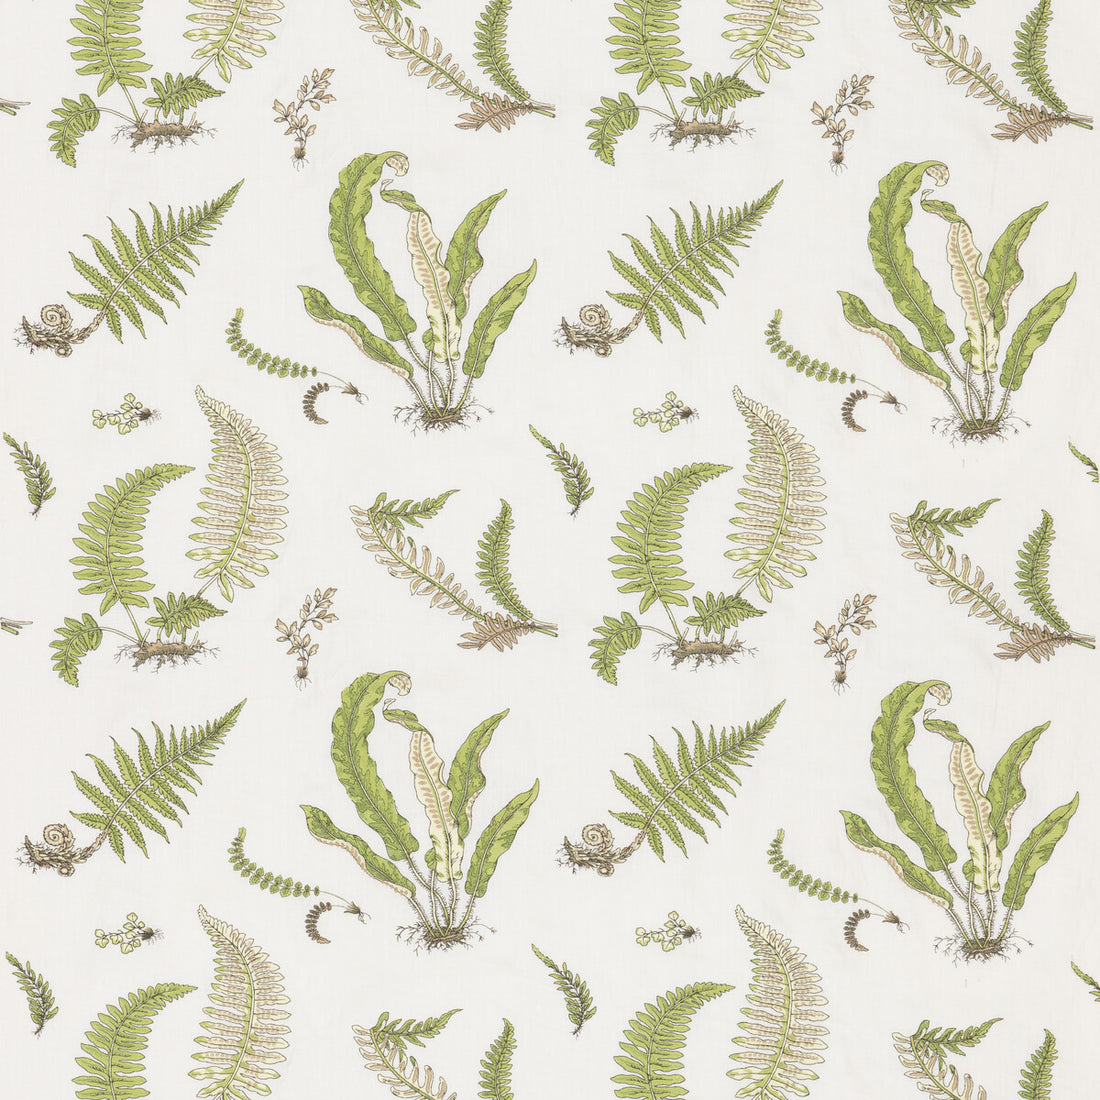 Ferns Embroidery fabric in green color - pattern BF10991.2.0 - by G P &amp; J Baker in the Burford collection